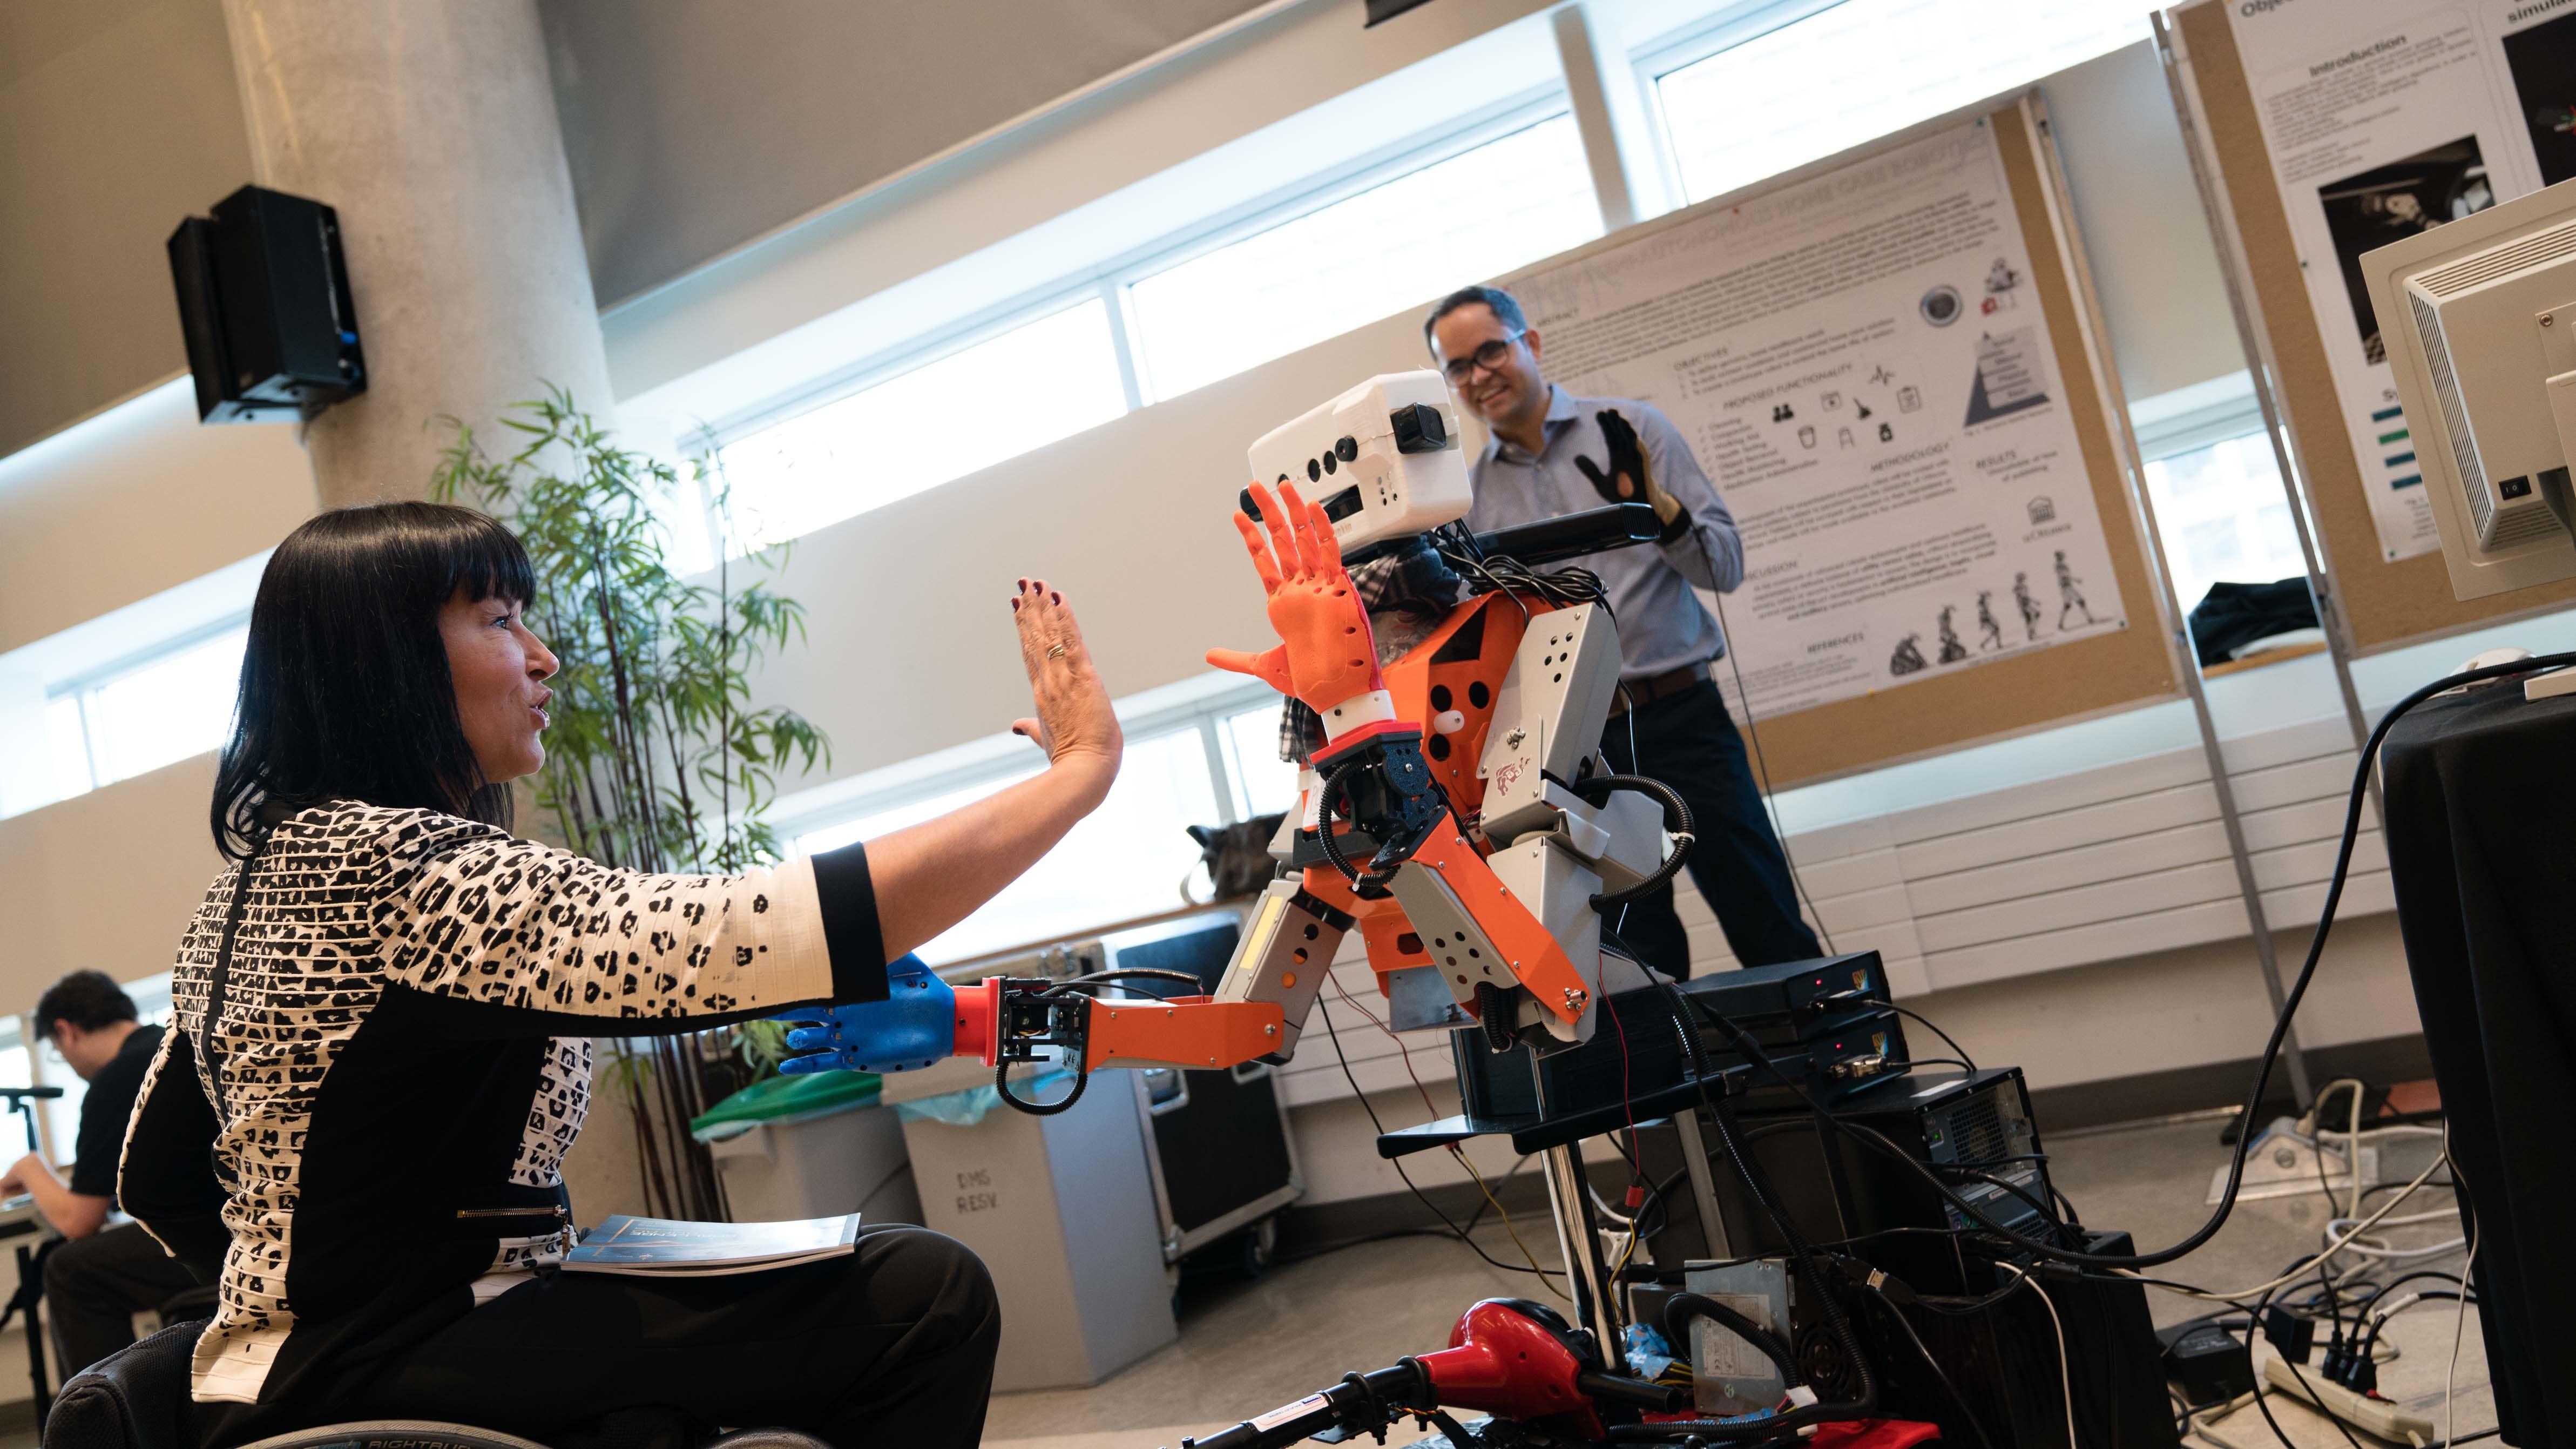 Senator Chantal Petitclerc high-fives a robot during an innovation fair in 2017 as part of her work on the Senate Committee on Social Affairs, Science and Technology.